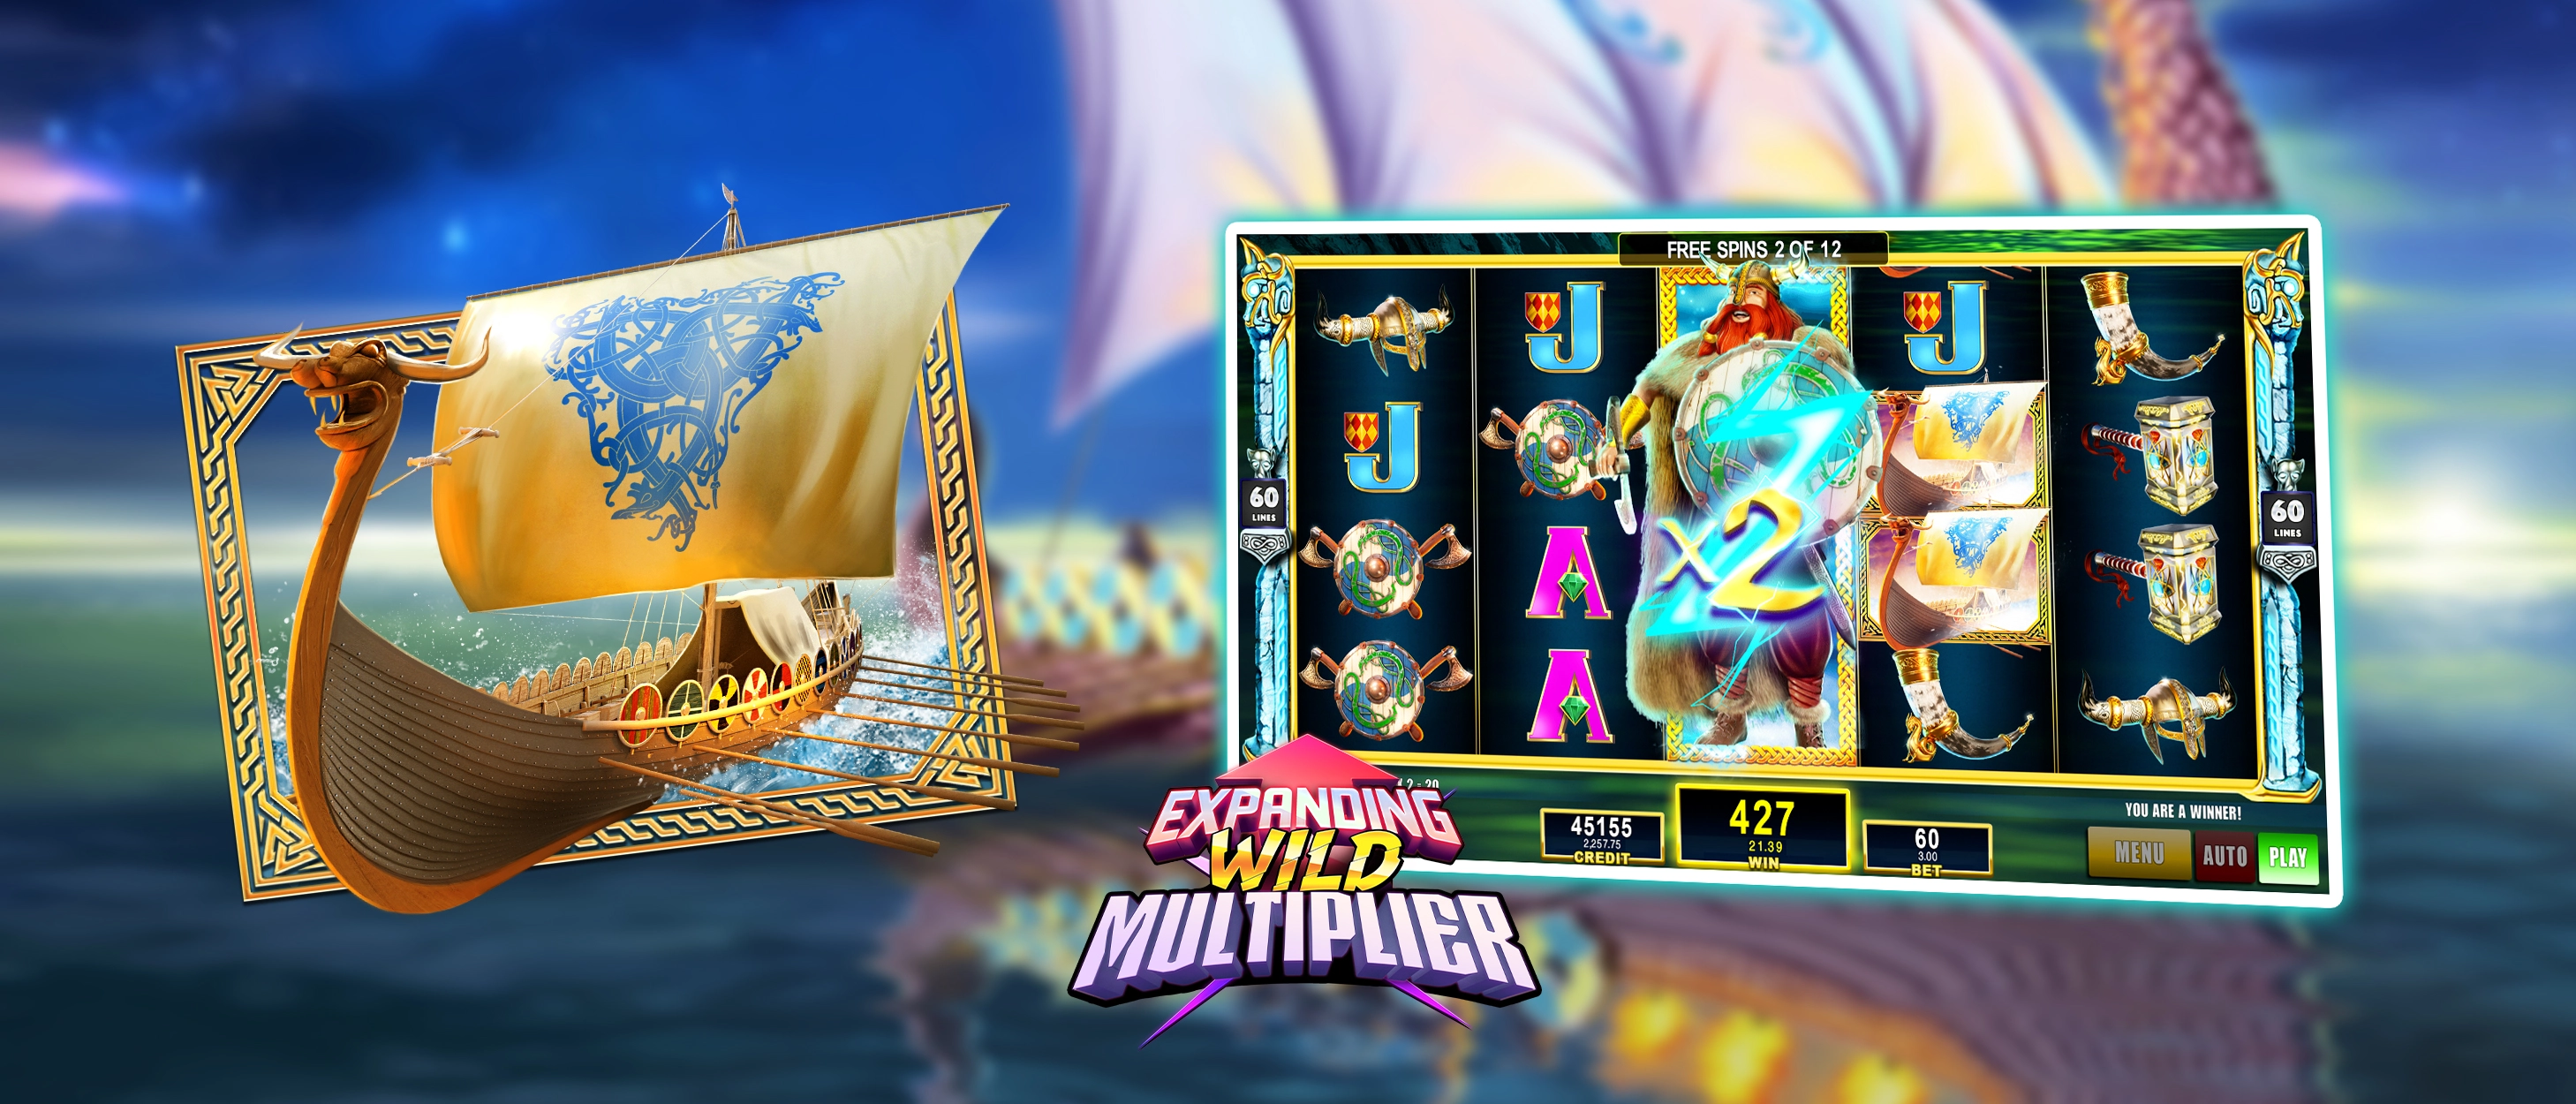 The image includes a symbol of the Viking Journey slots and a game screen with the Expanding Wild Multiplier game feature active.